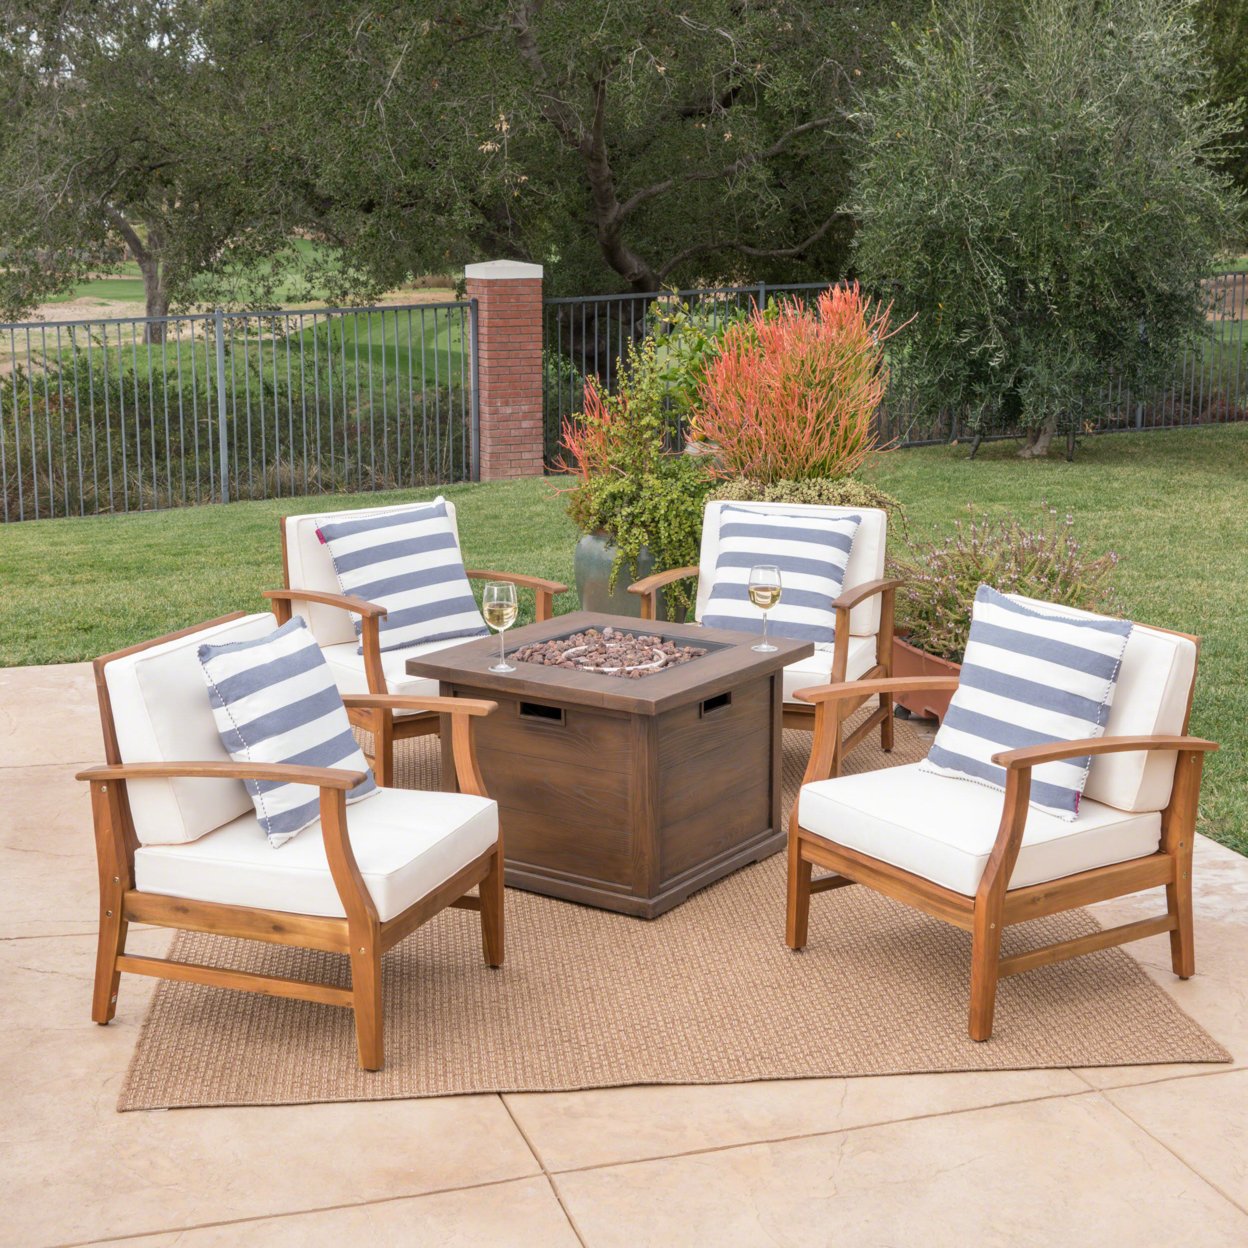 Lilith Outdoor 4 Seat Teak Finished Acacia Wood Club Chairs Fire Pit Chat Set - Cream